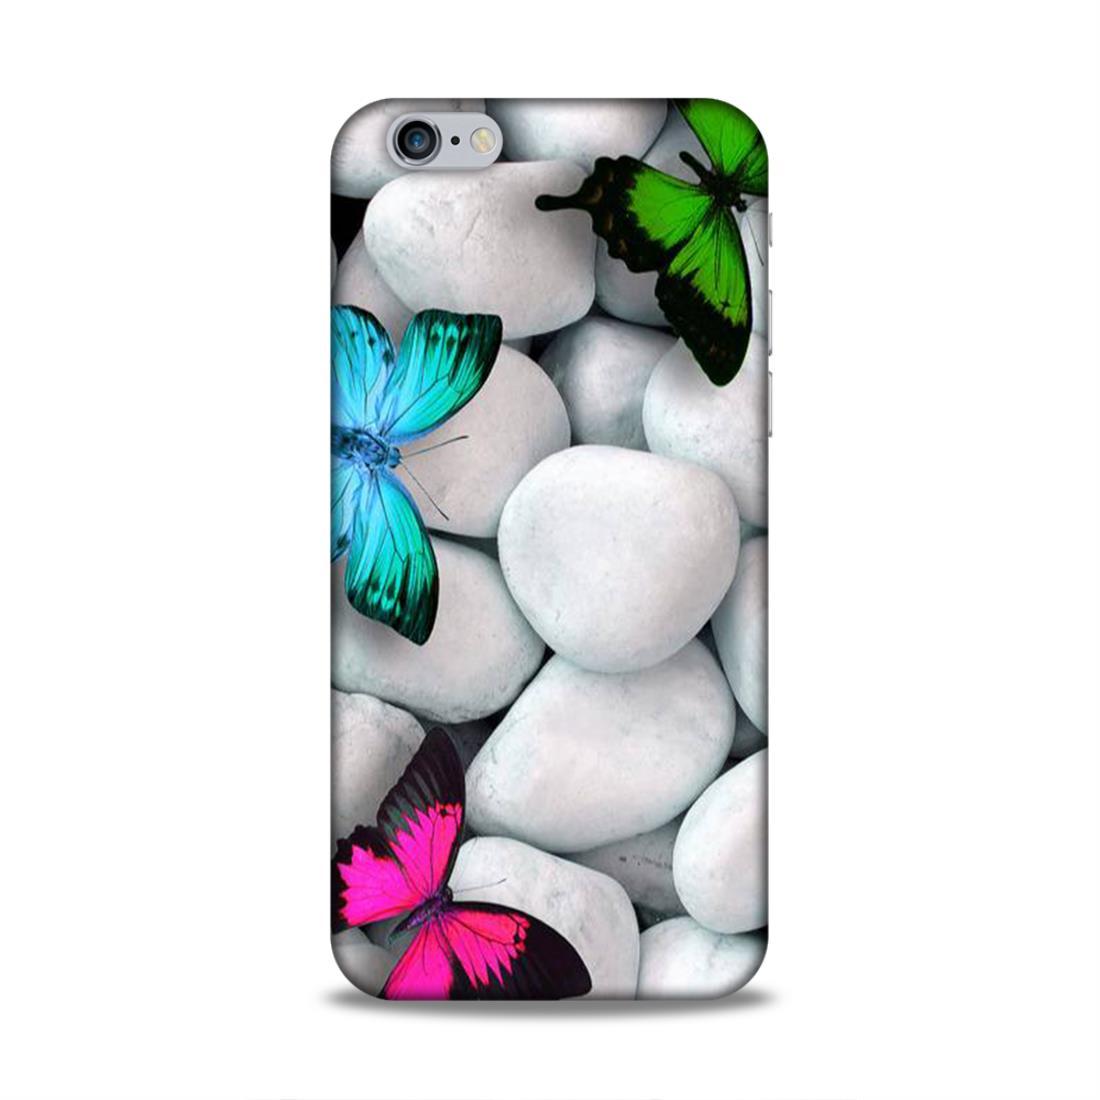 White Stone iPhone 6 Phone Case Cover